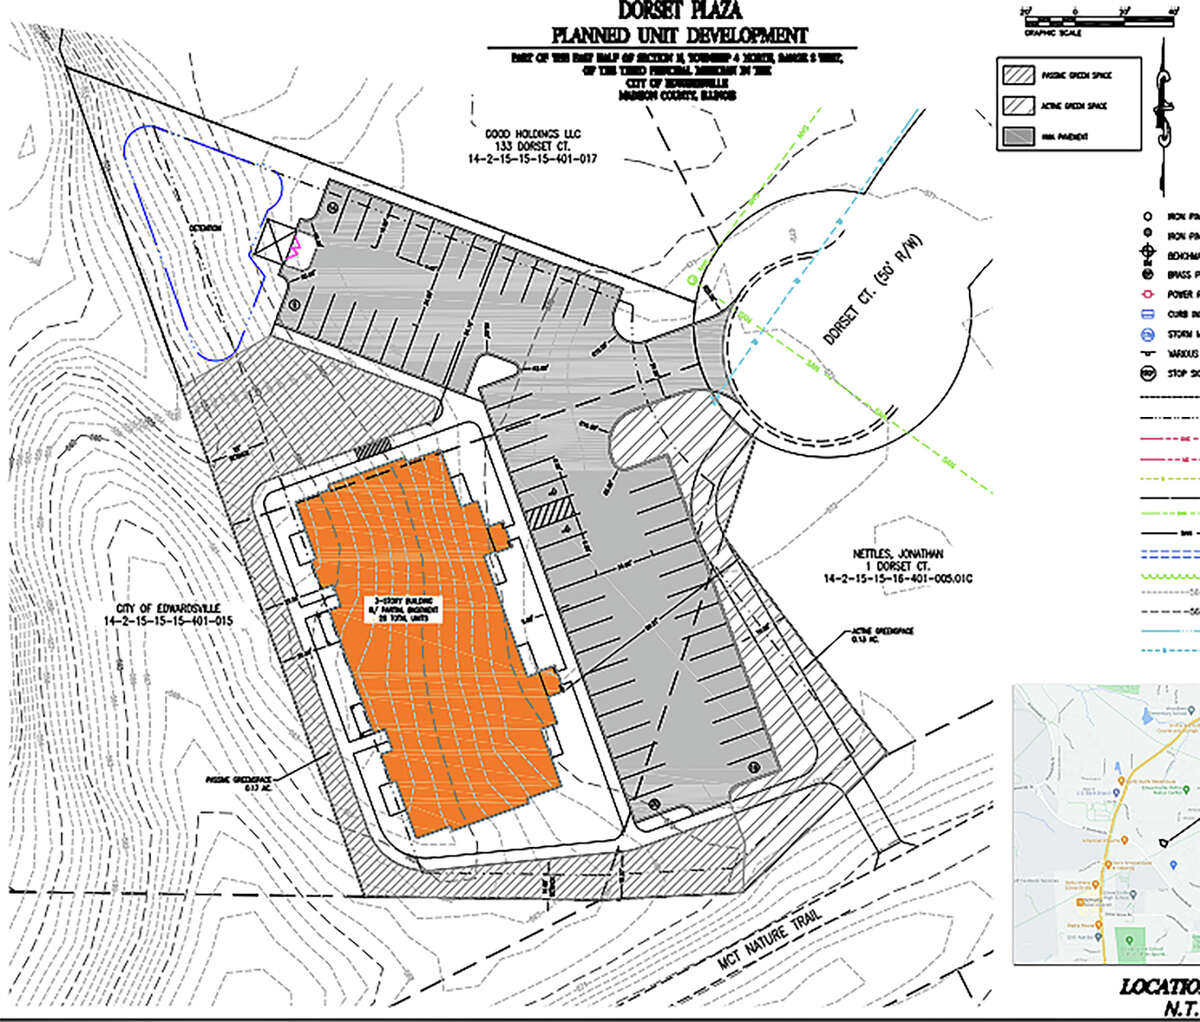 Preliminary site plan for Dorset Plaza, which would go at the end of Dorset Court, if approved later this year.